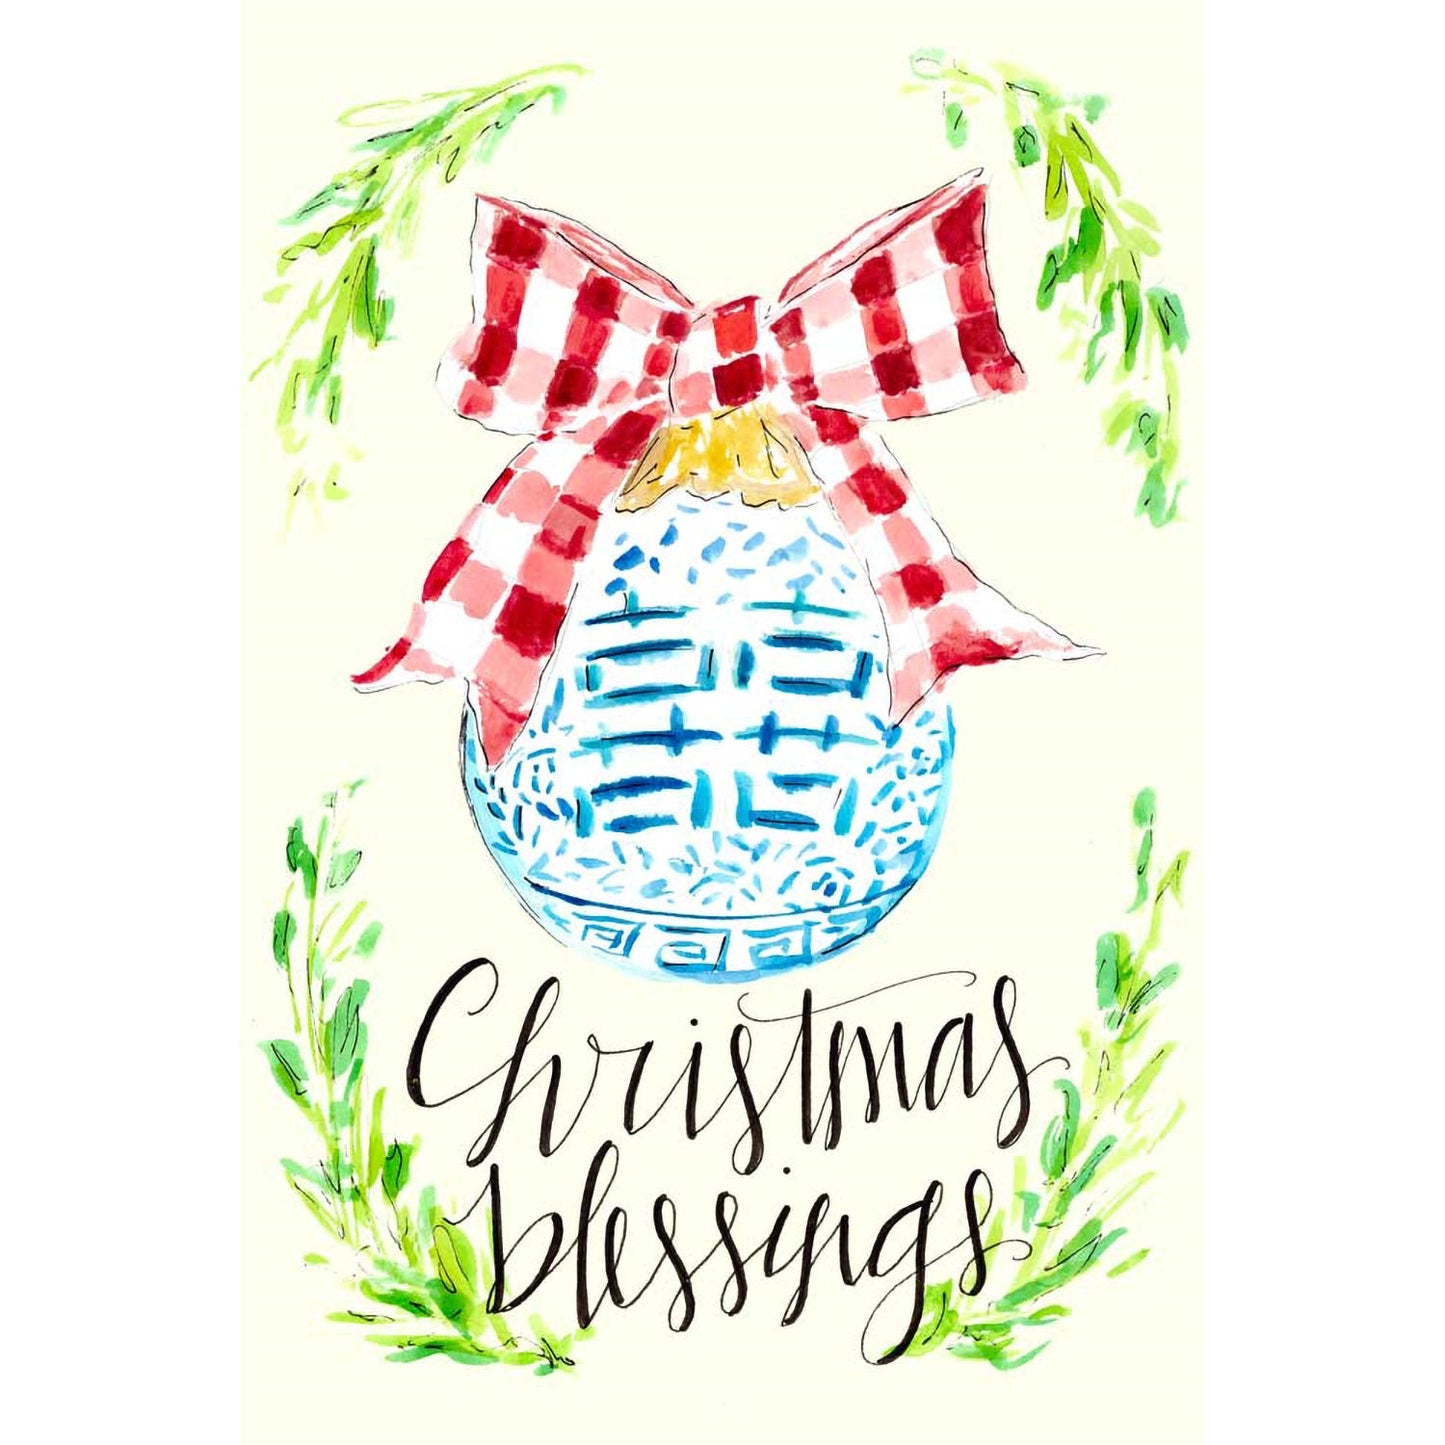 Holiday - Christmas Blessings Canvas Wall Art